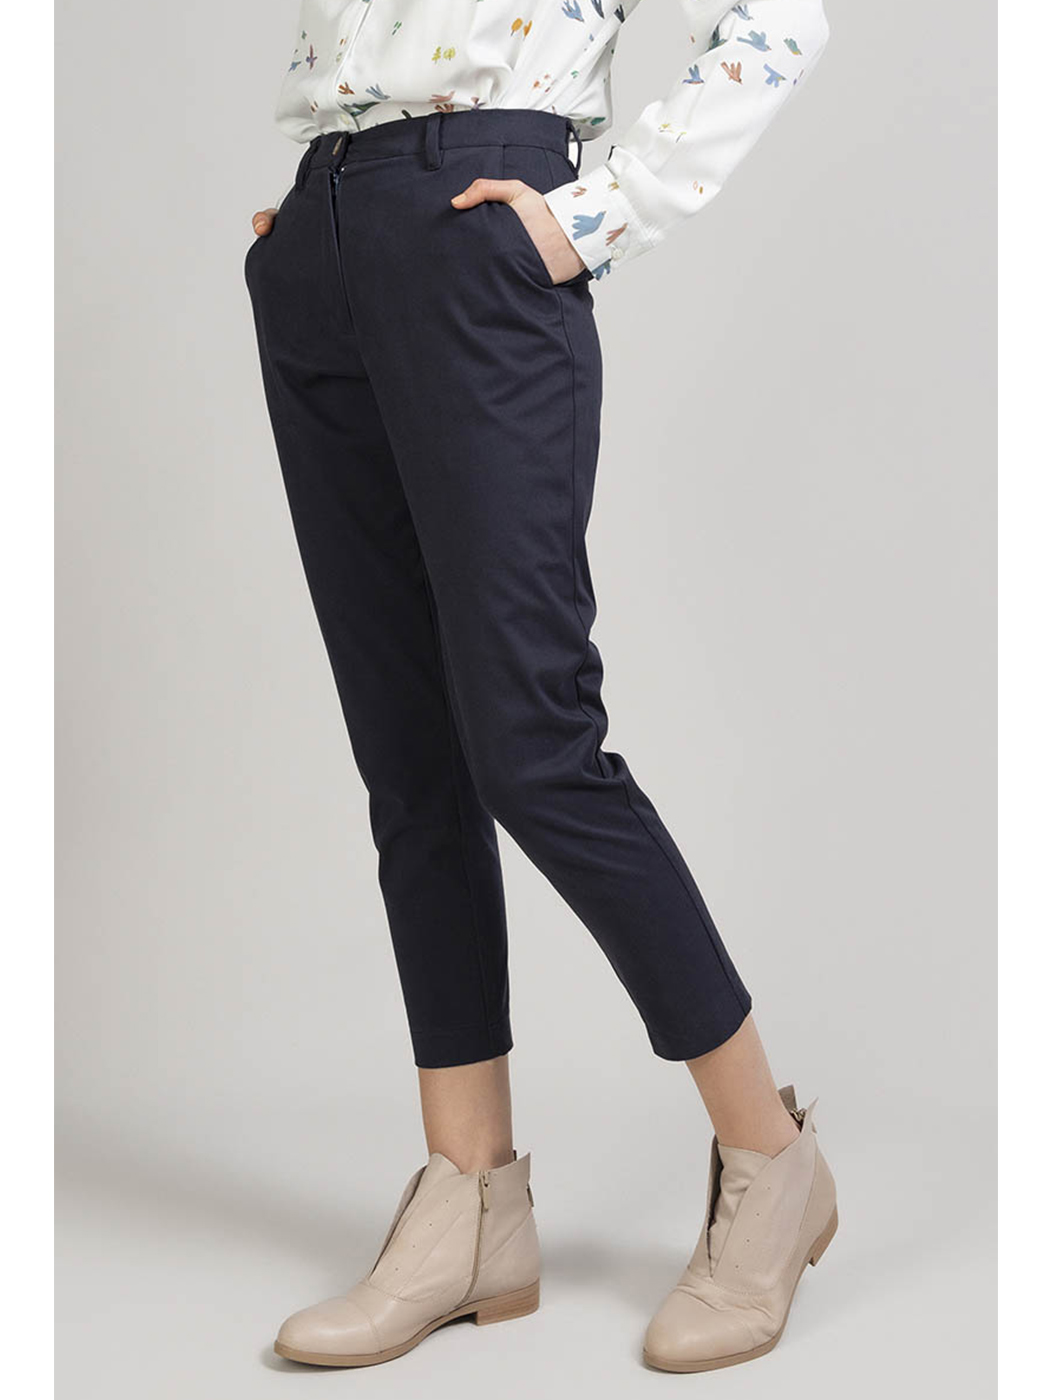 Thanks to its comfort, Indo is a real must-have: this pair of slim-fit, straight-leg trousers, with back darts, has french pockets, loop belts and is closed by a front button and zip. Super versatile — try wearing it with our iconic Bruin shirt!